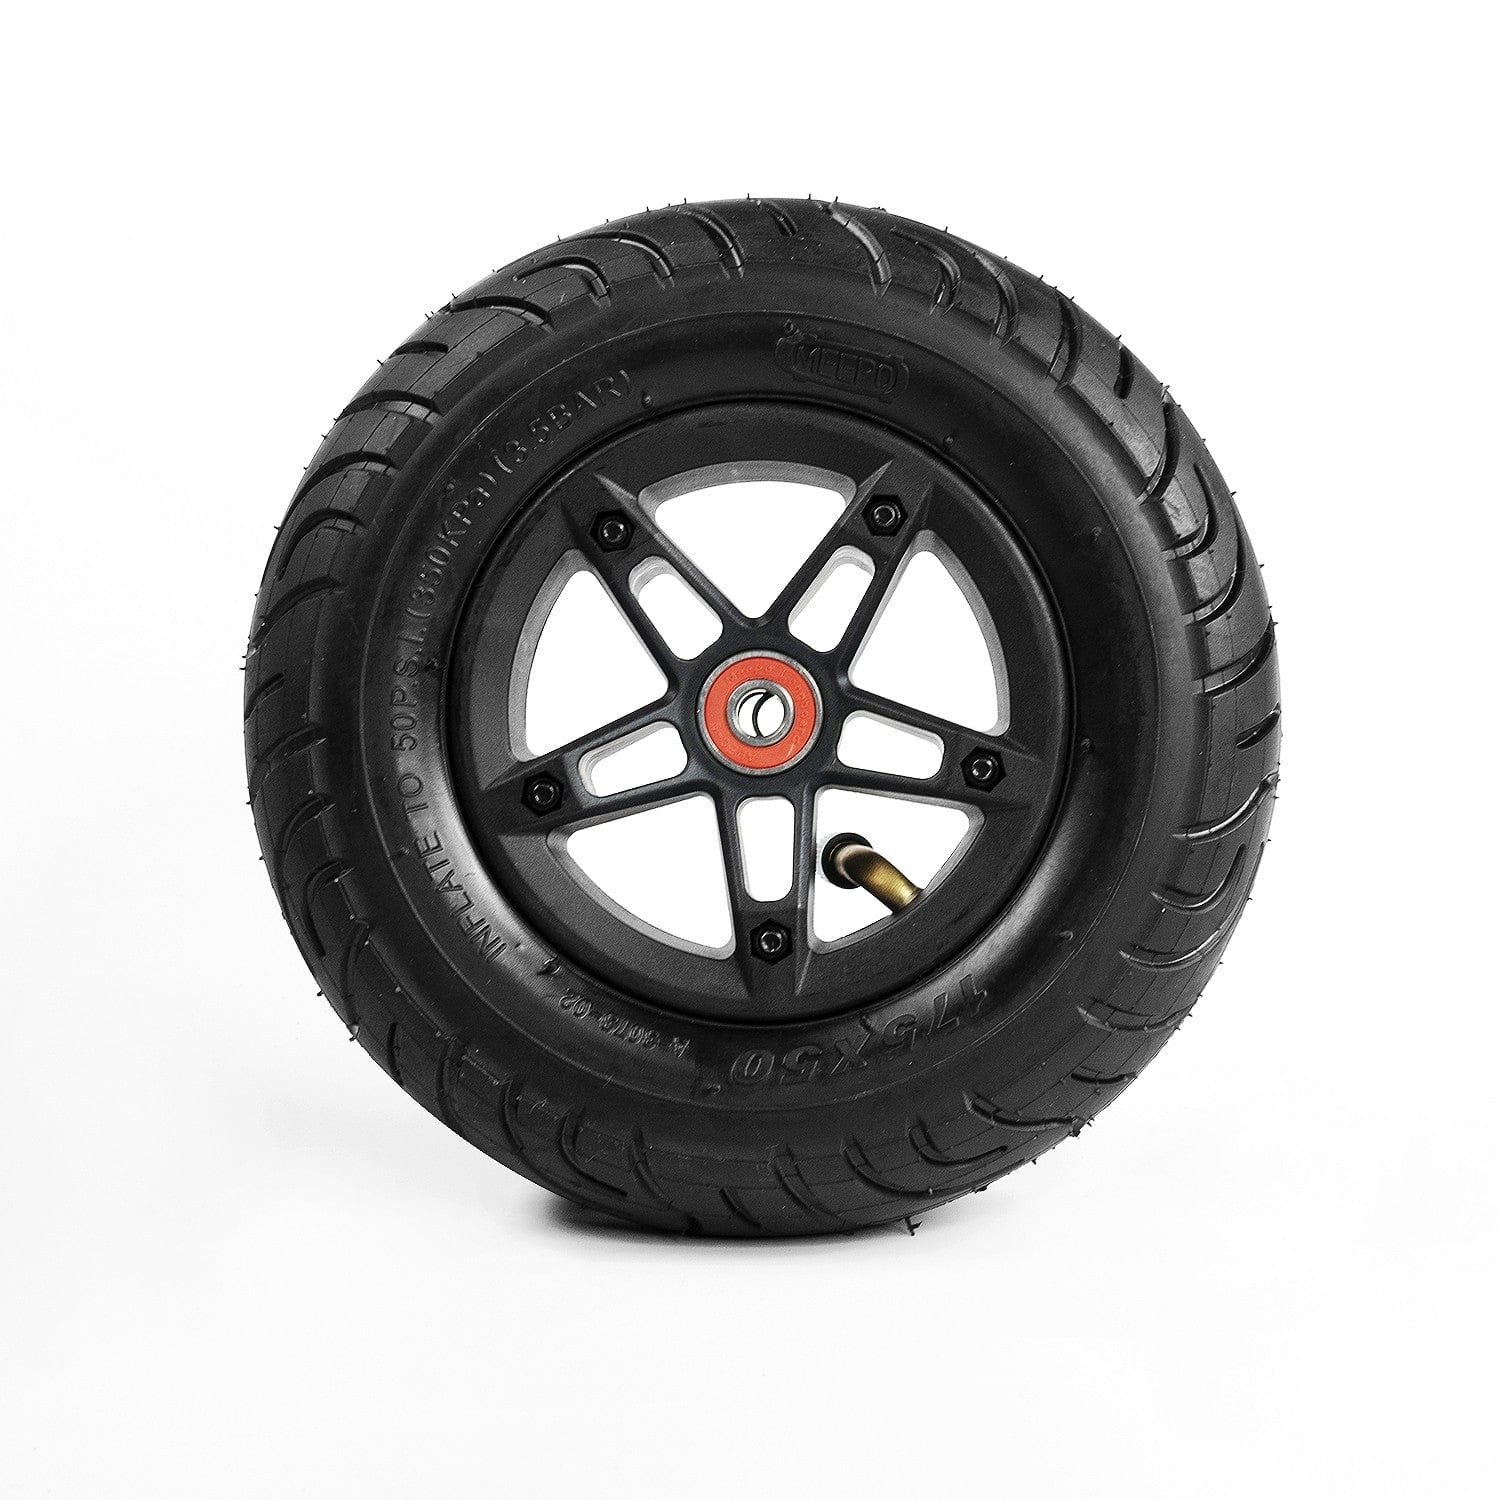 175mm Pneumatic Tire for Hurricane X1